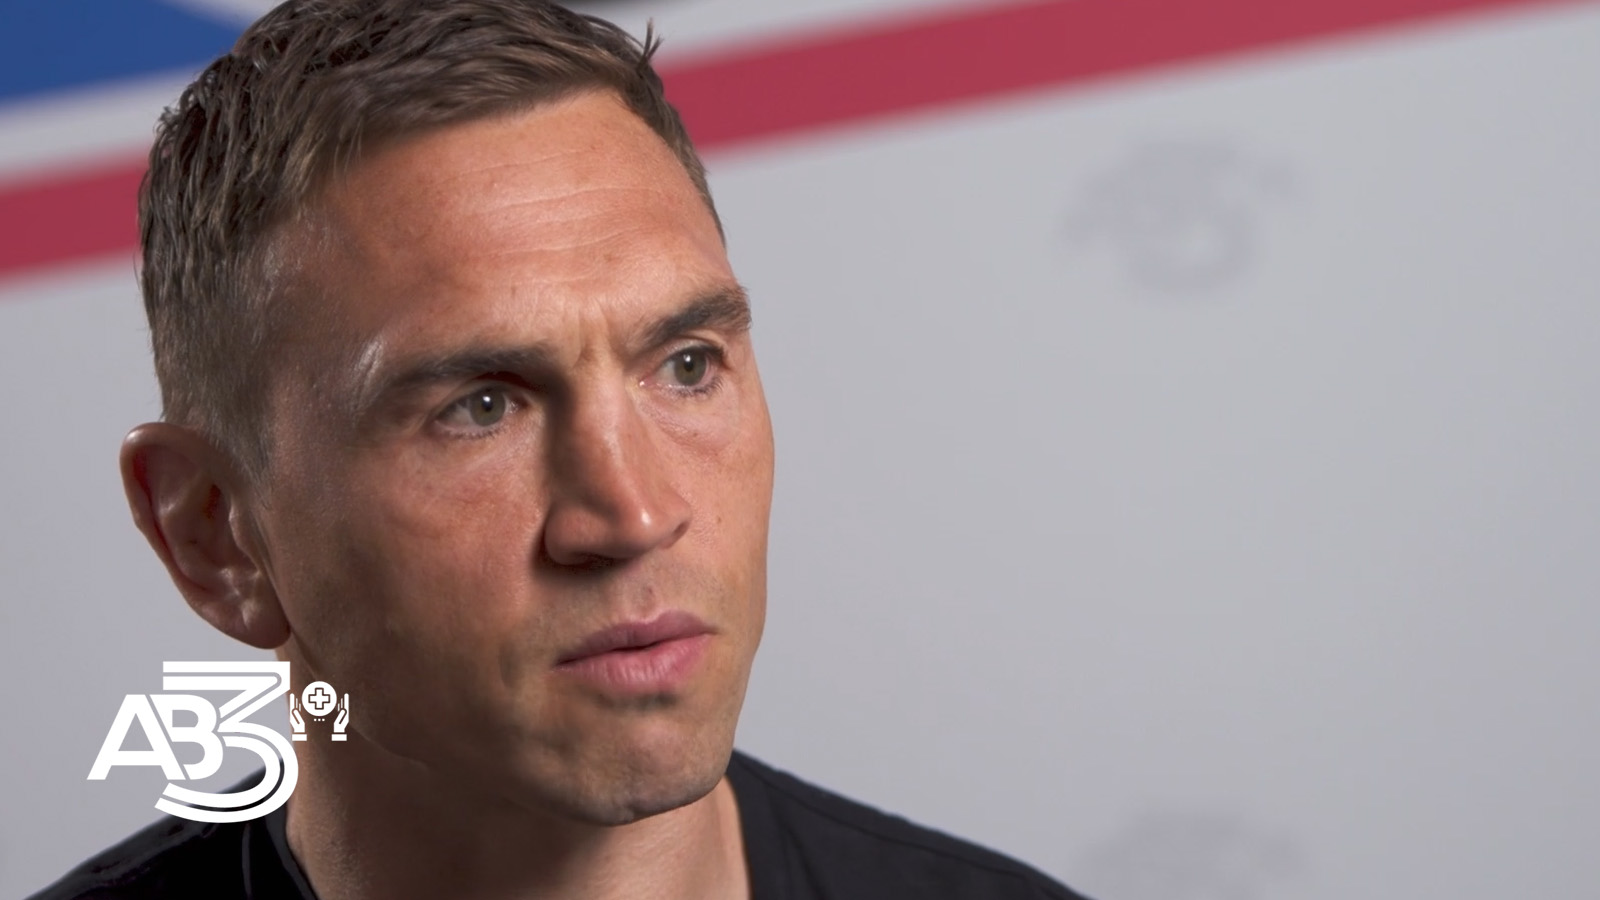 AB3 Medical video thumbnail - Kevin Sinfield